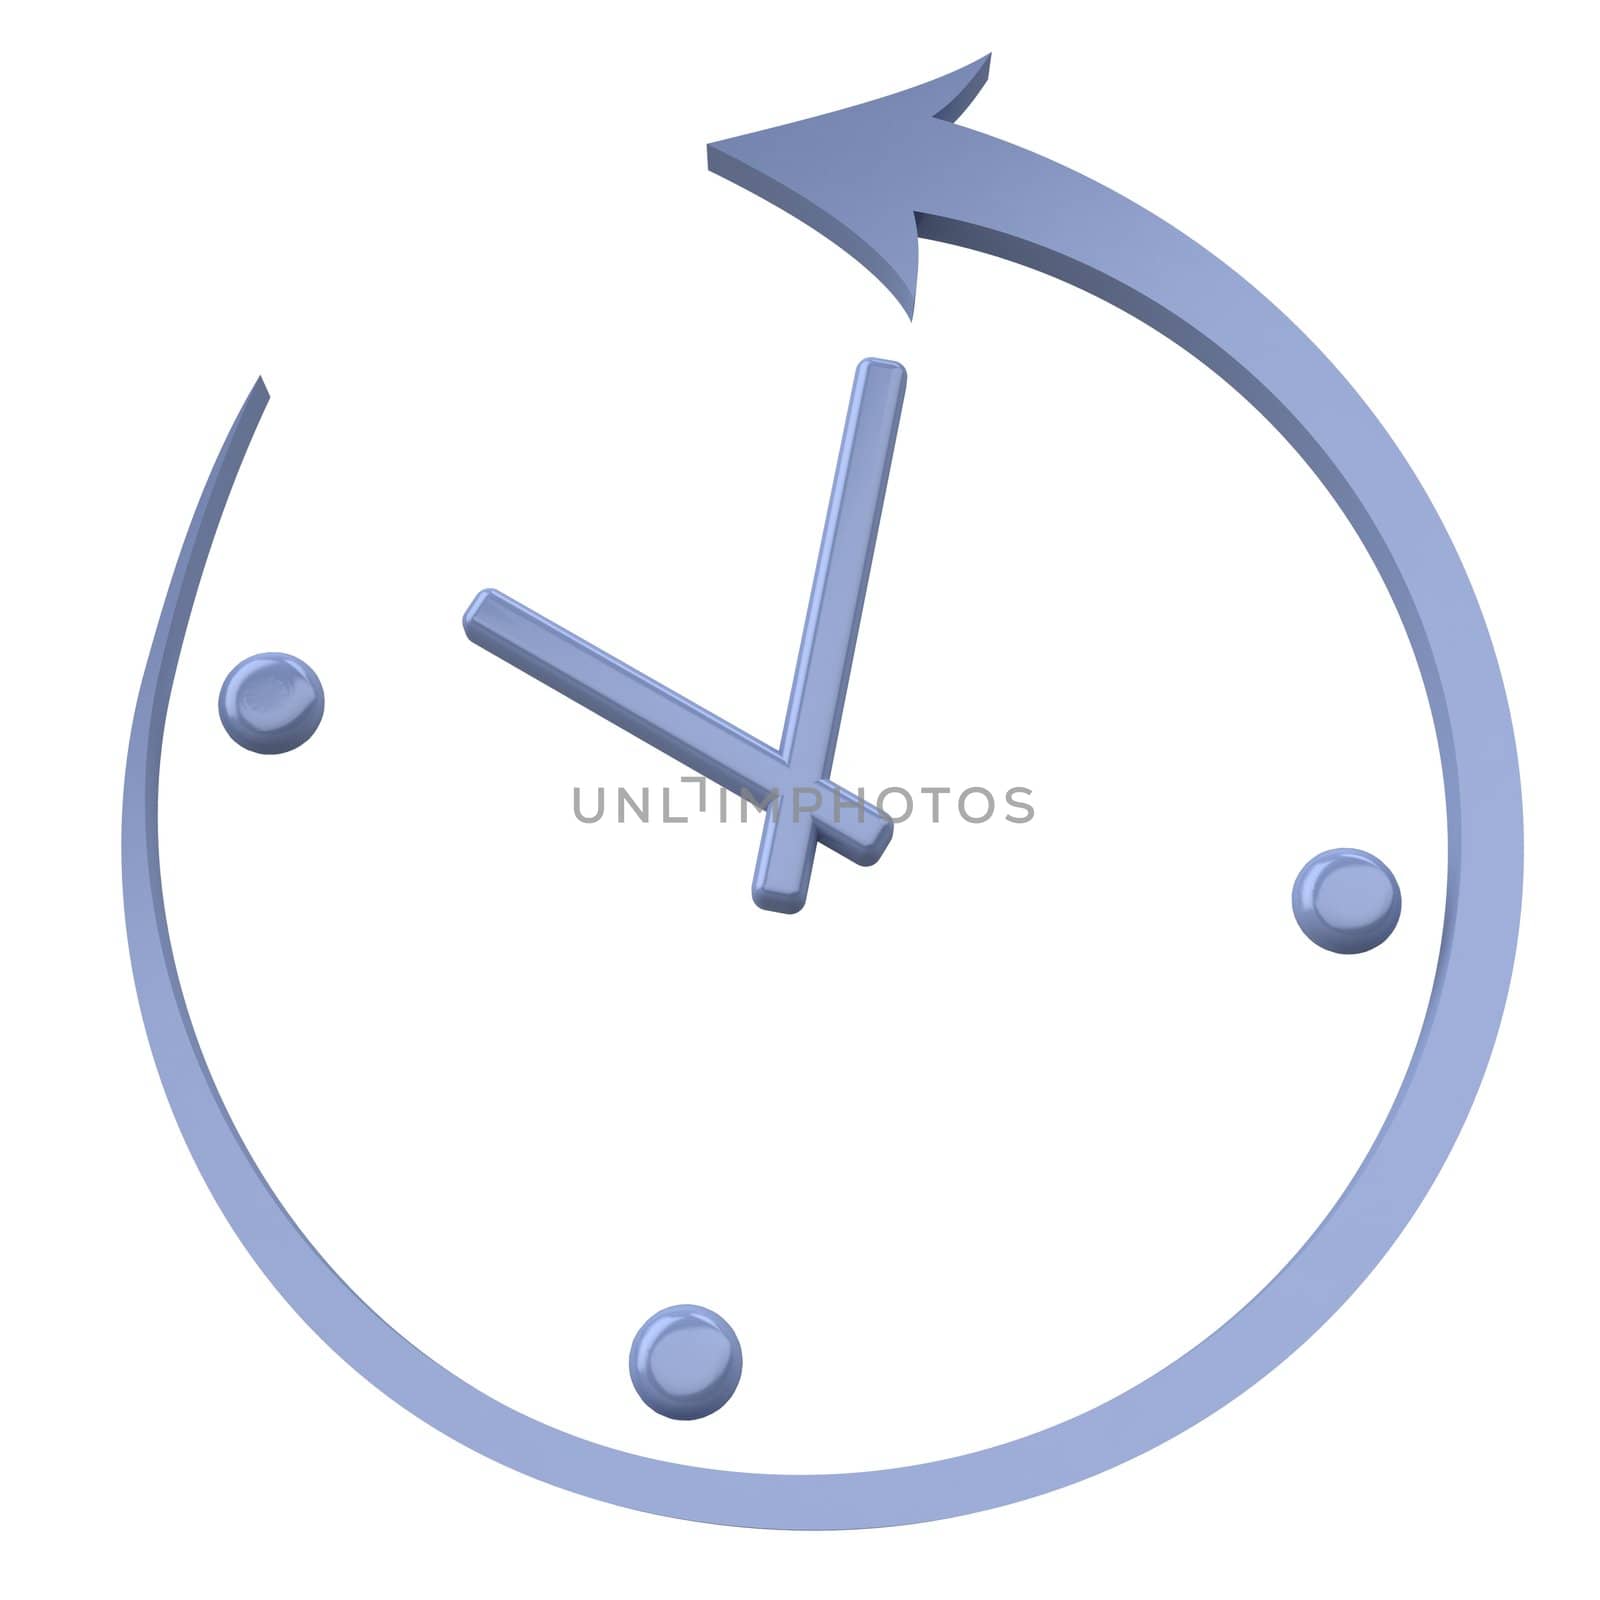 Turn back the clock. Abstract clock on a white background.